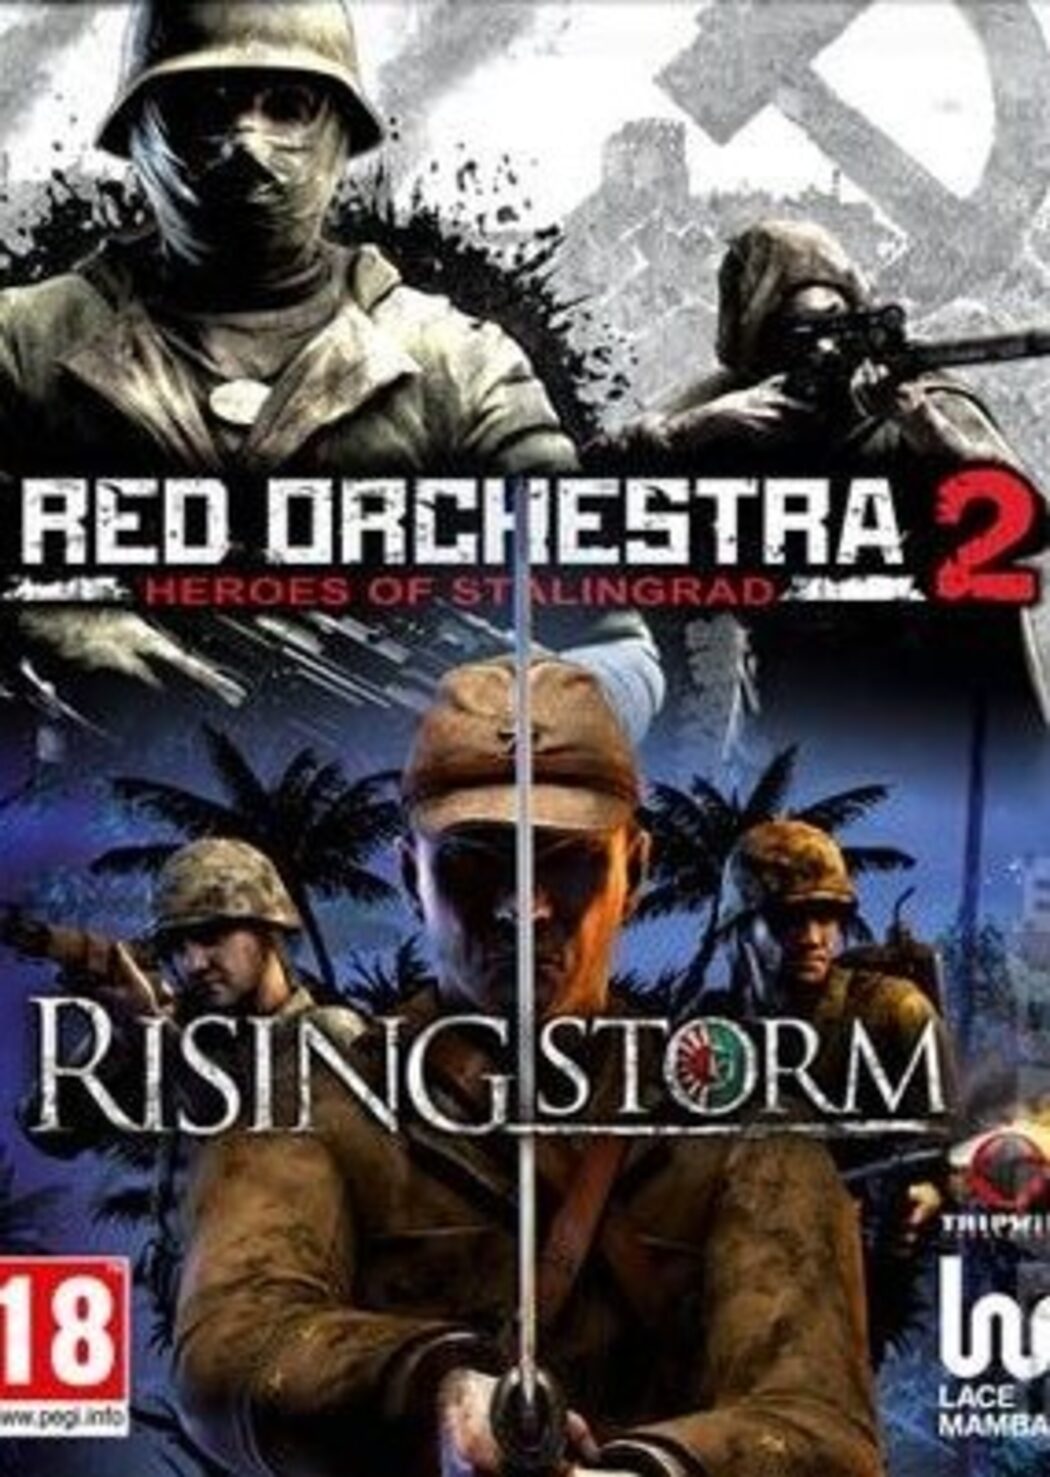 red orchestra 2 rising storm amazon